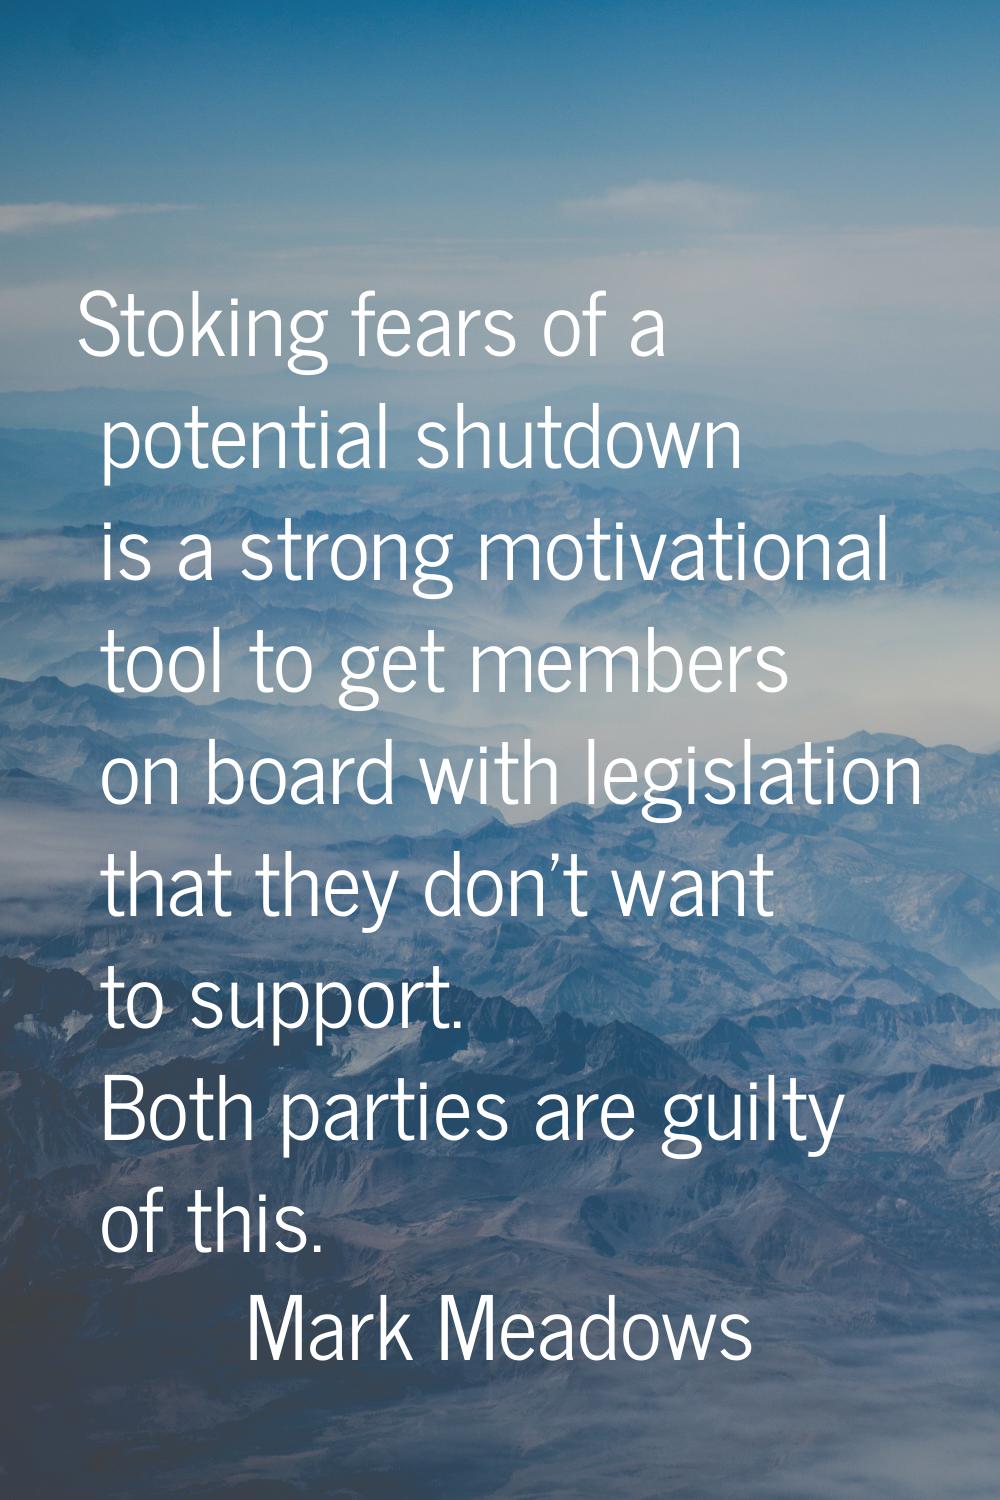 Stoking fears of a potential shutdown is a strong motivational tool to get members on board with le